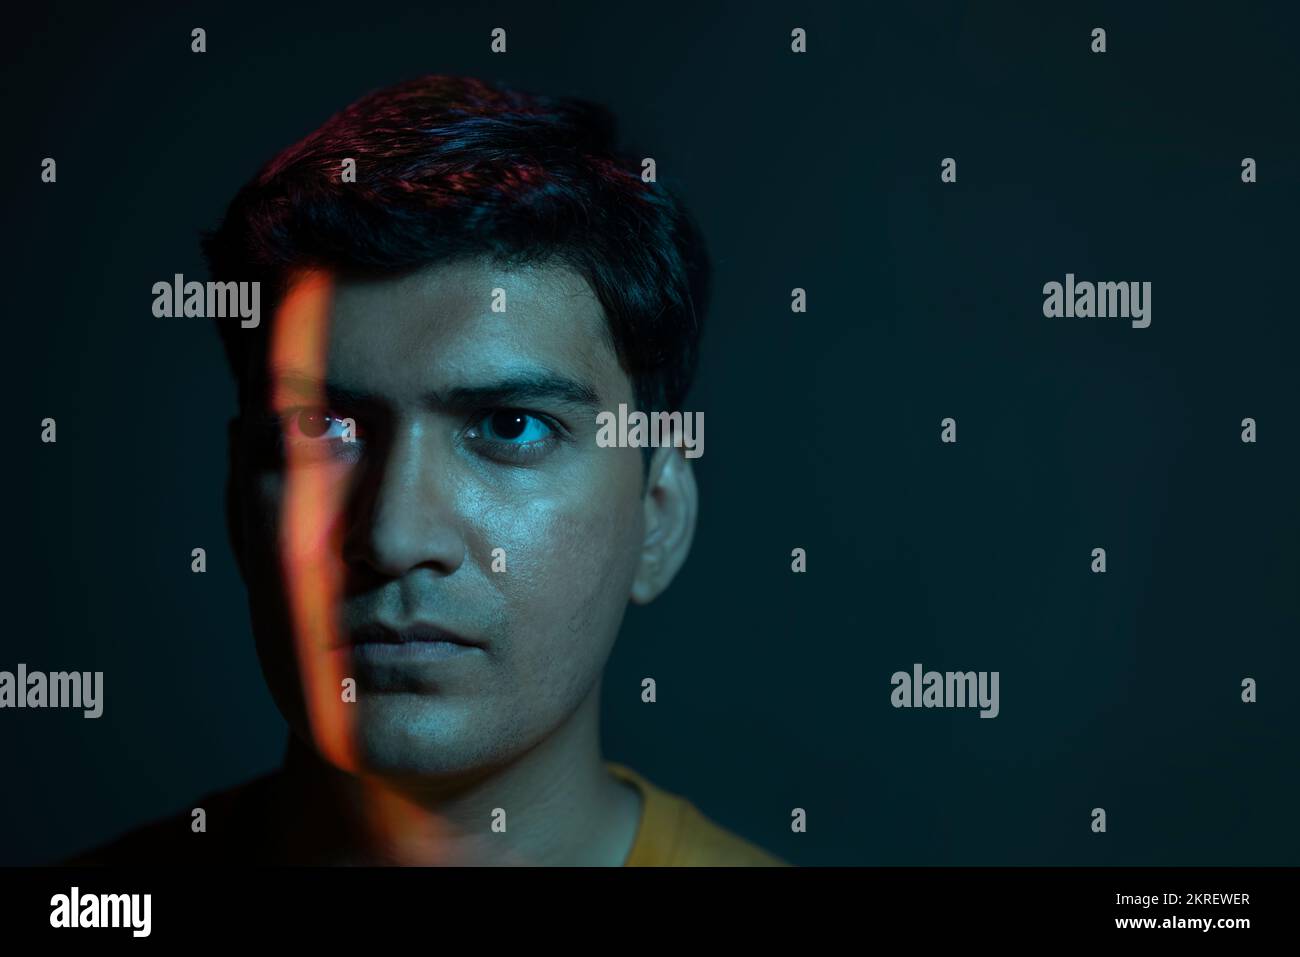 Portrait of man lit by neon colored lights on face Stock Photo